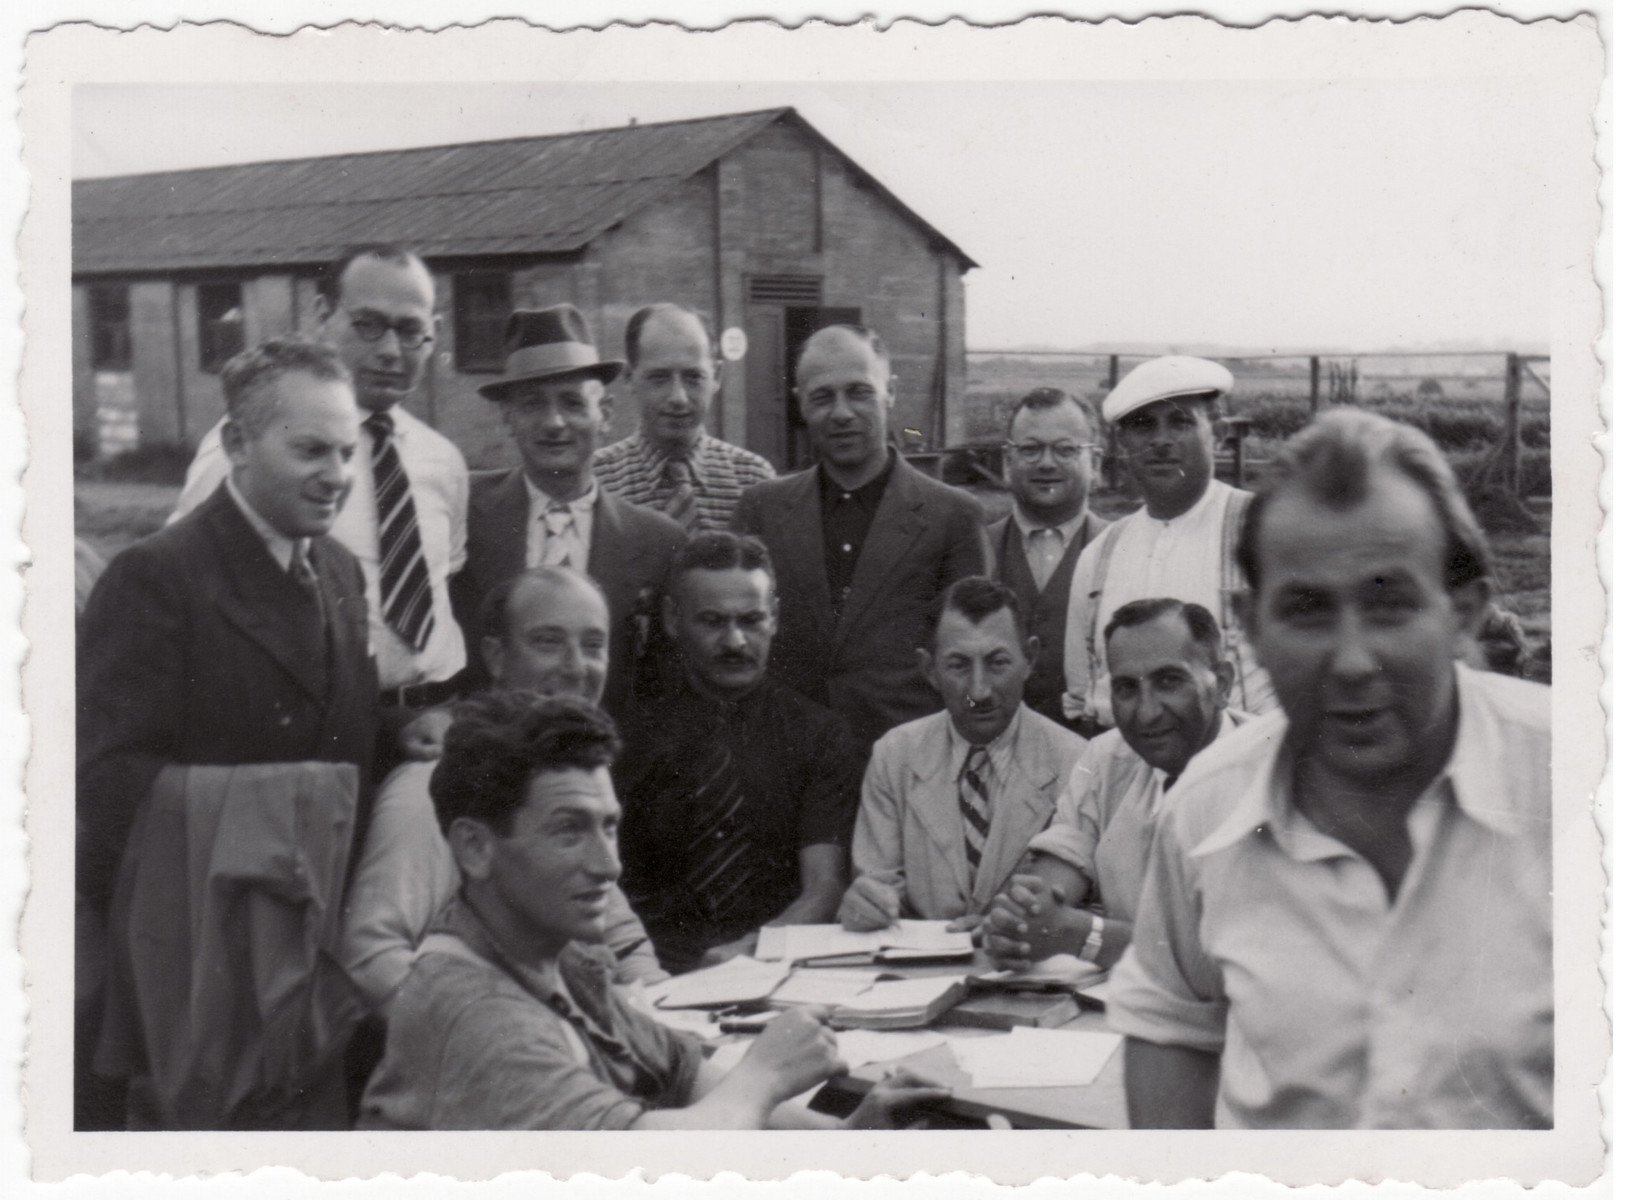 Jewish men gather around an outdoor table in the Kitchener refugee camp.

Siegfried Kulmann is pictured in the lower right wearing a white short sleeve shirt.